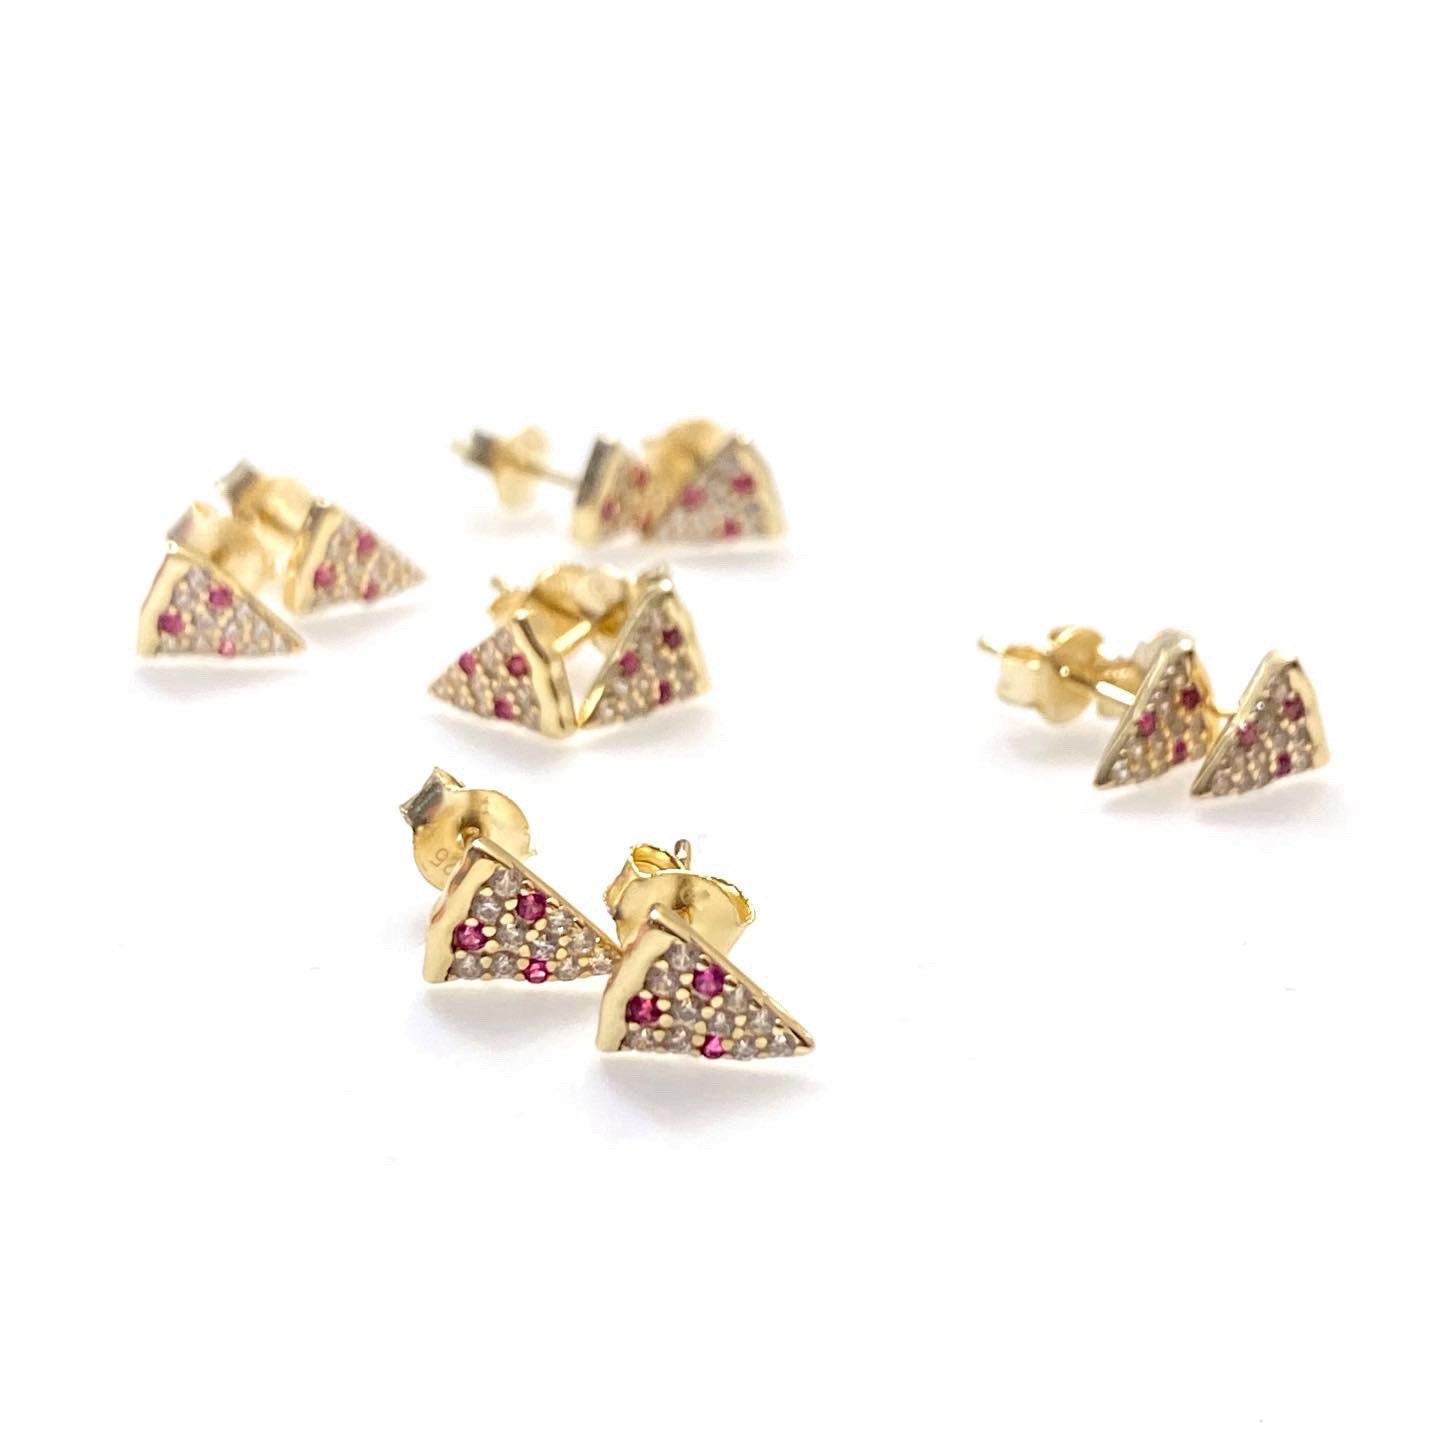 Pizza studs (gold plated sterling silver and cubic zirconia stones)